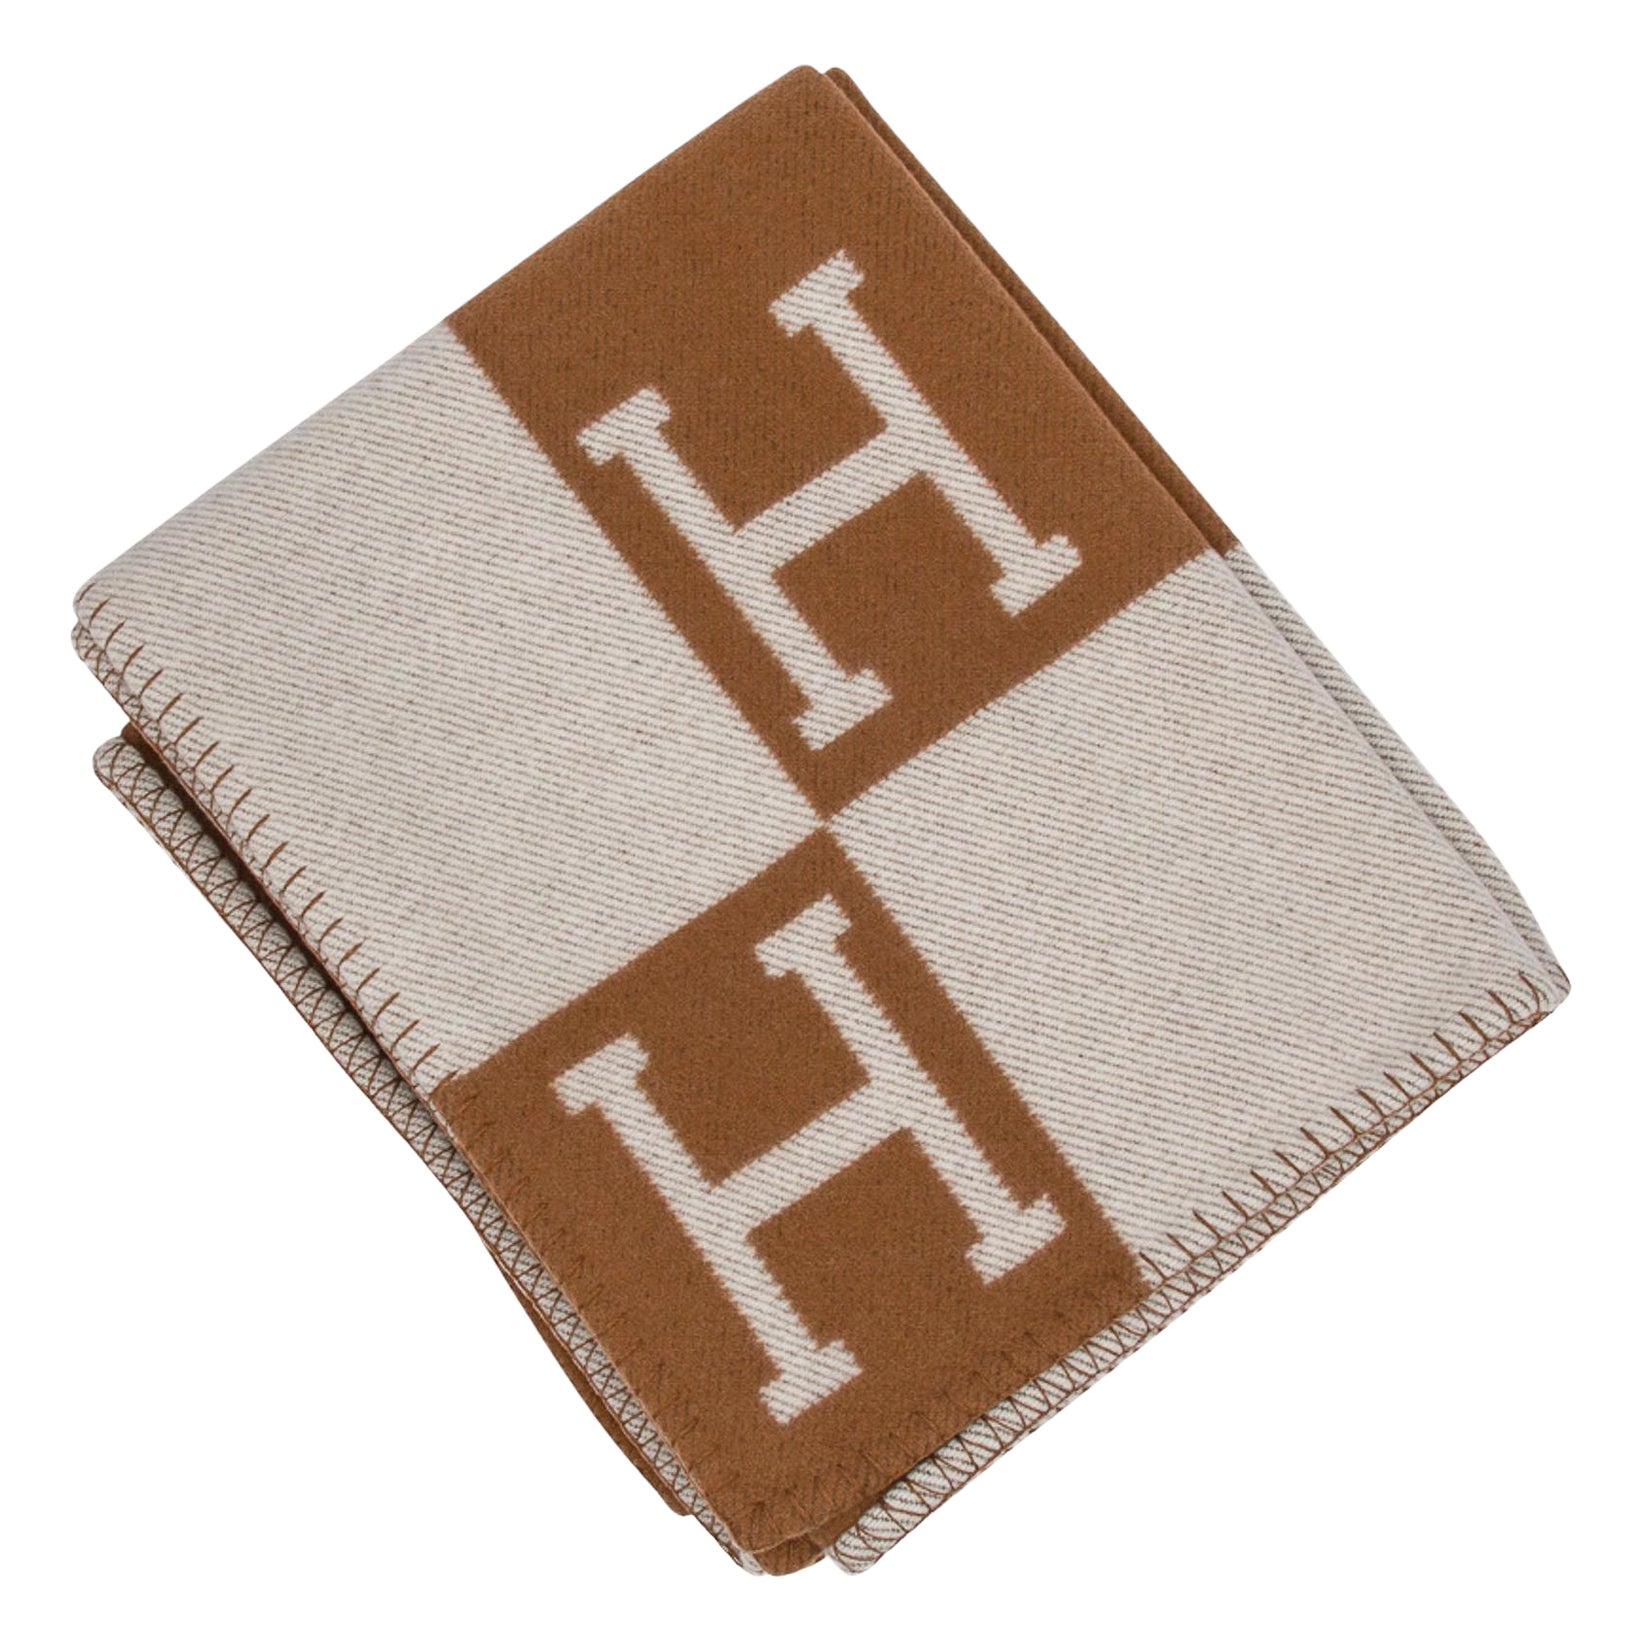 Hermes Avalon III Signature H Blanket Camel and Ecru Throw New